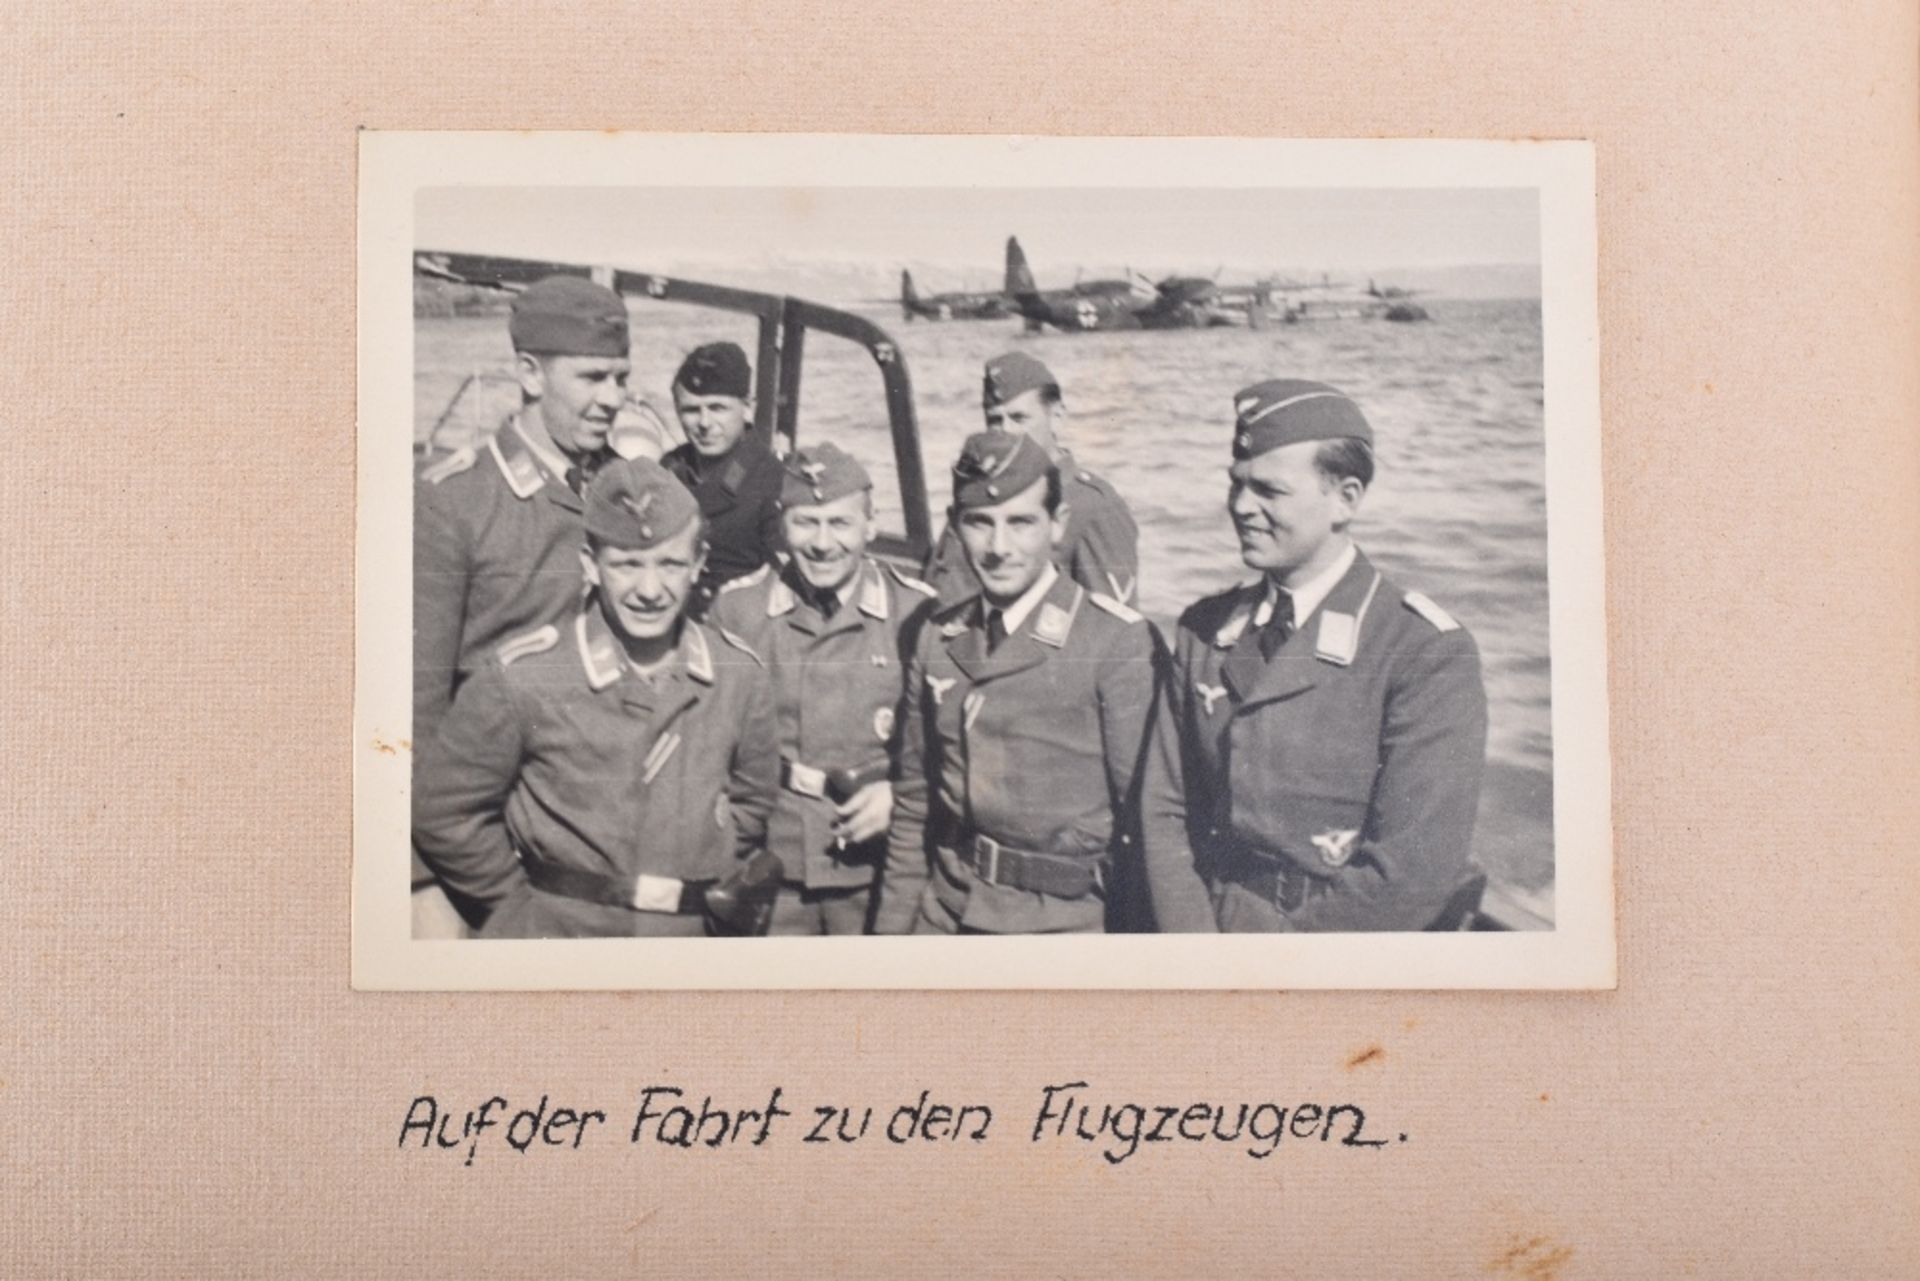 Outstanding and Historically Interesting Luftwaffe Photograph Album, Log Book and Soldbuch of Observ - Image 49 of 96